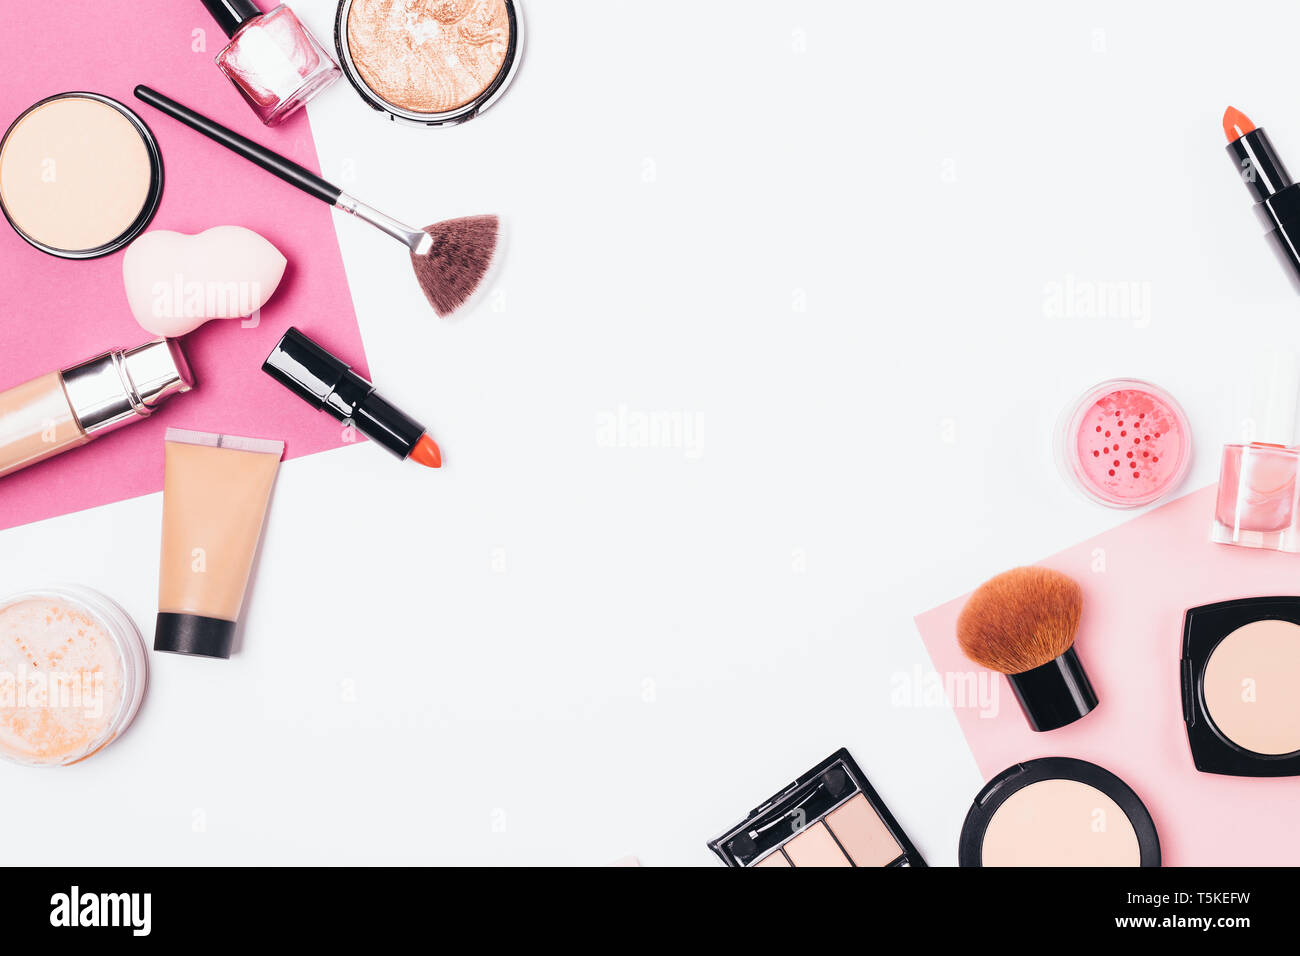 Women's decorative cosmetics and accessories on white background, flat lay.  Top view makeup tools and beauty products Stock Photo - Alamy